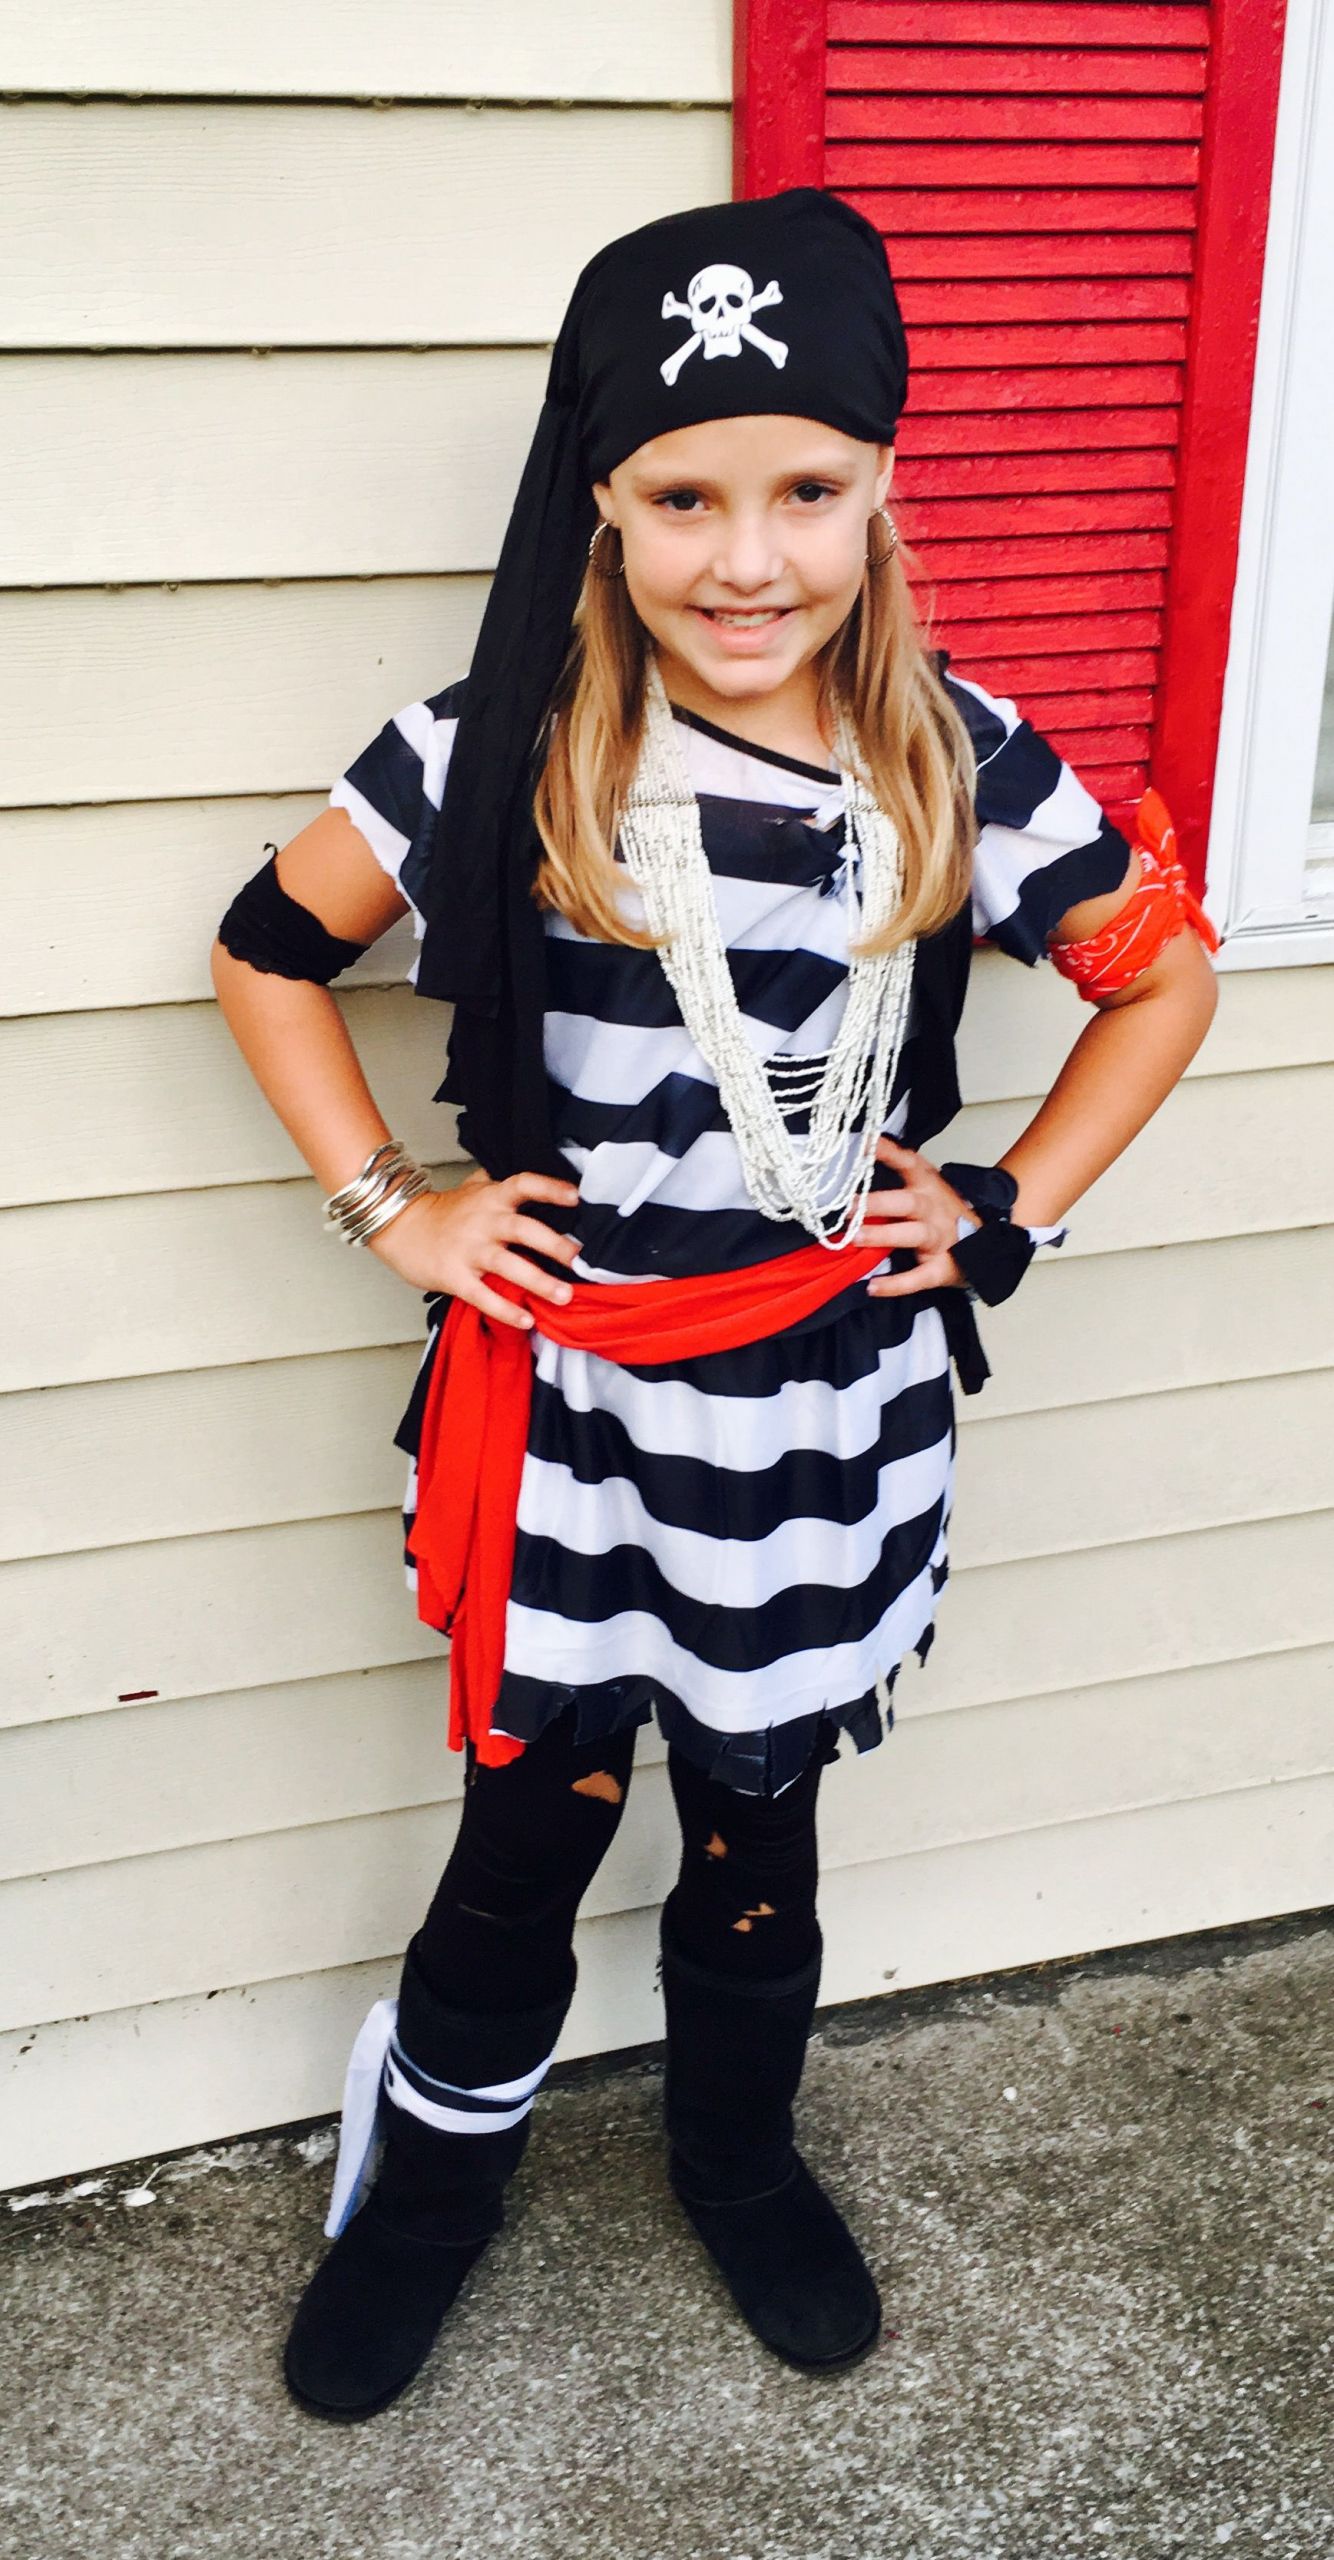 DIY Prisoner Costume
 Easy girl s pirate costume made from cheap adult size